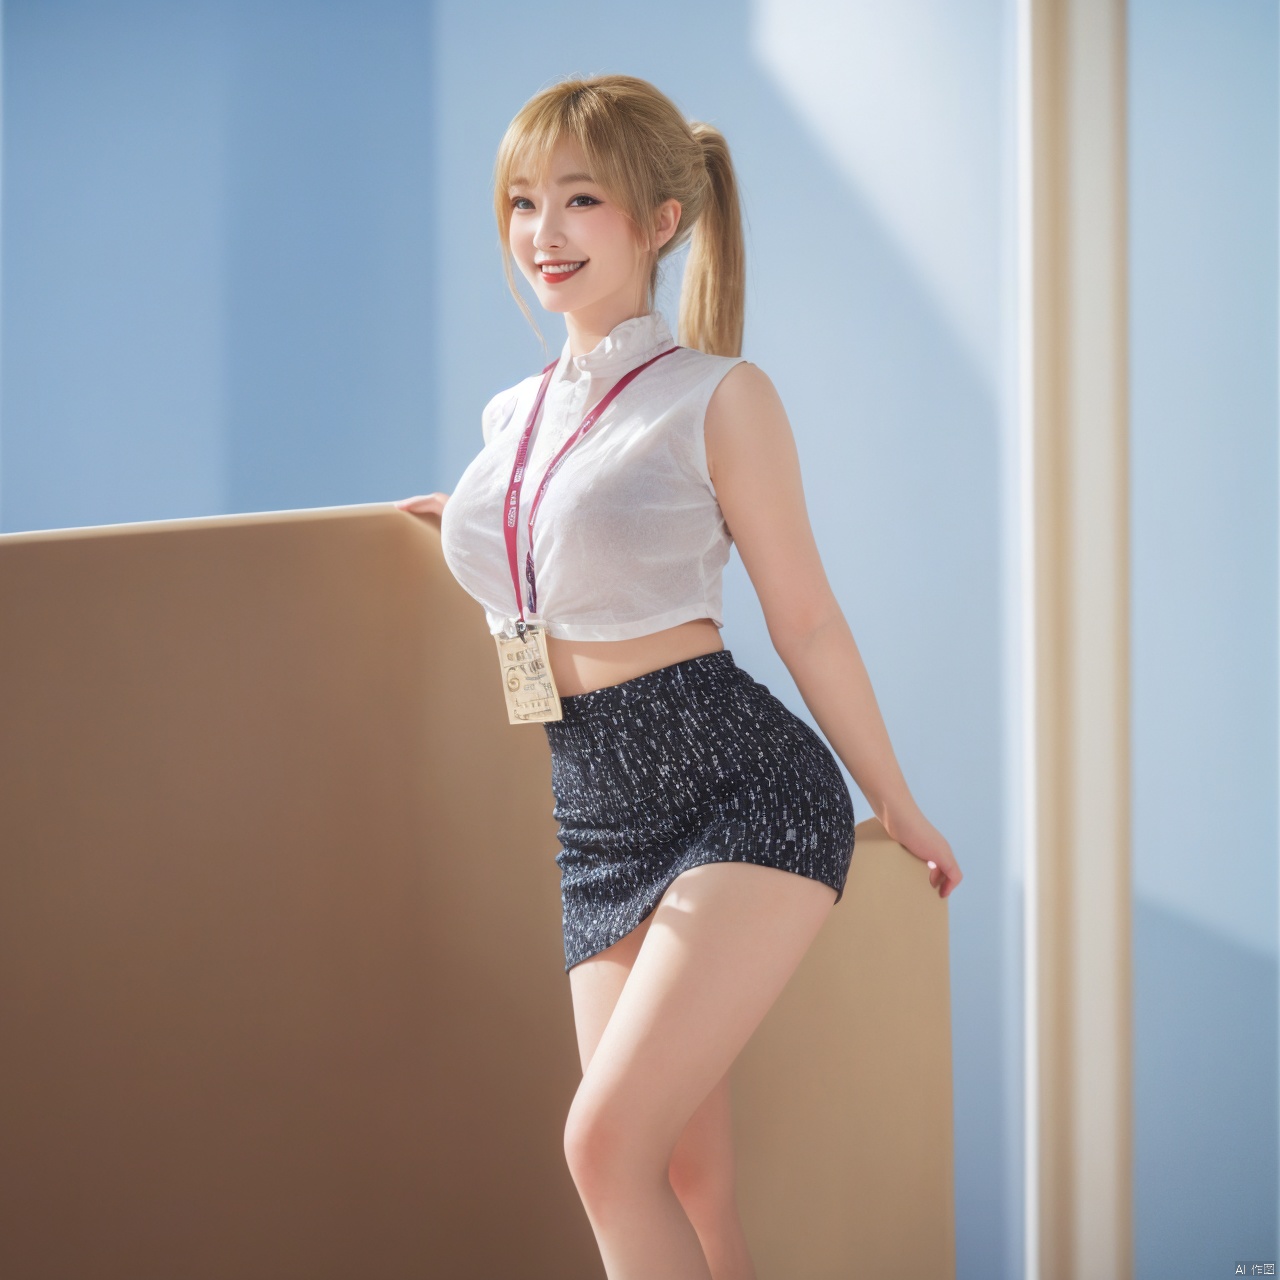  1 sexy girl,(ponytail=1.331),(standing in bank=1.3),full_body,[master piece:1.2],best quality,extremely detailed CG,perfect lighting,8k wallpaper,photograph,3D,(silly_smile),(blonde_hair),nsfw,(wear bank uniform=1.3)
